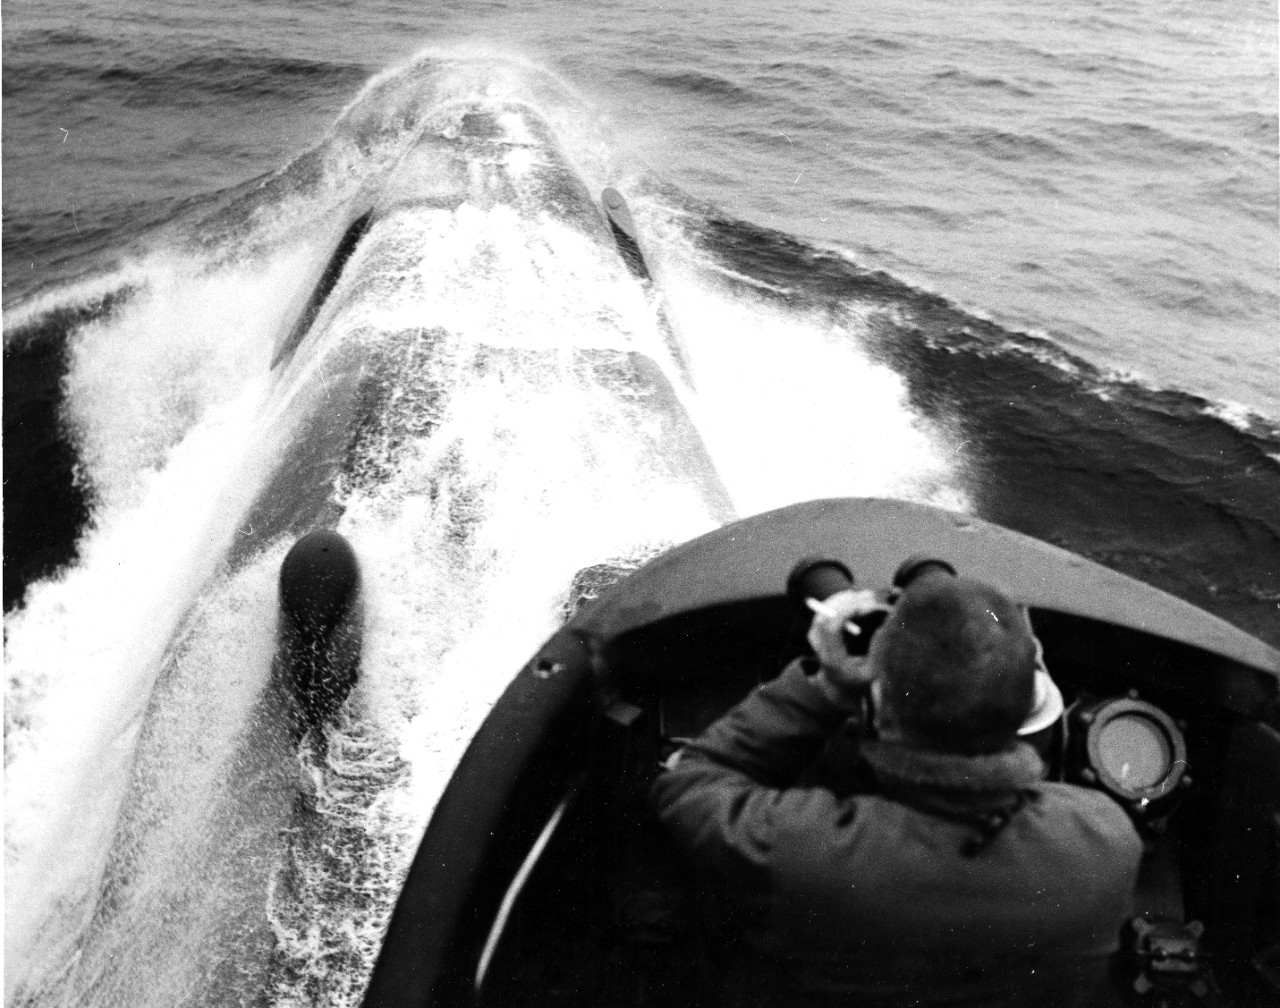 World's First Nuclear Powered Submarine- the U.S.S. Nautilus Sets Sail